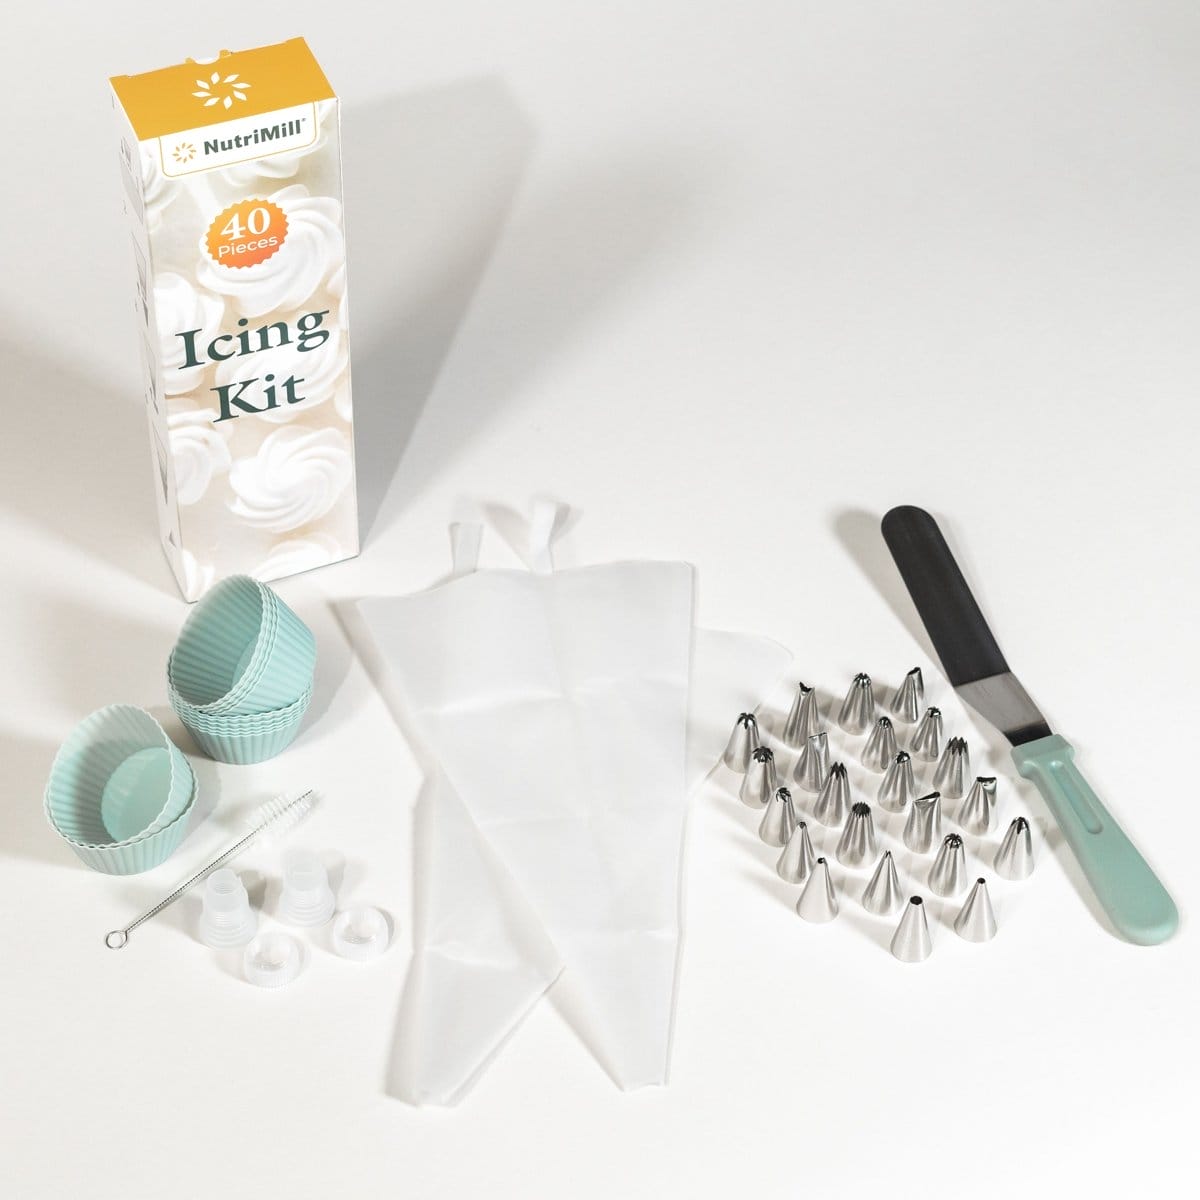 NutriMill Icing Kit